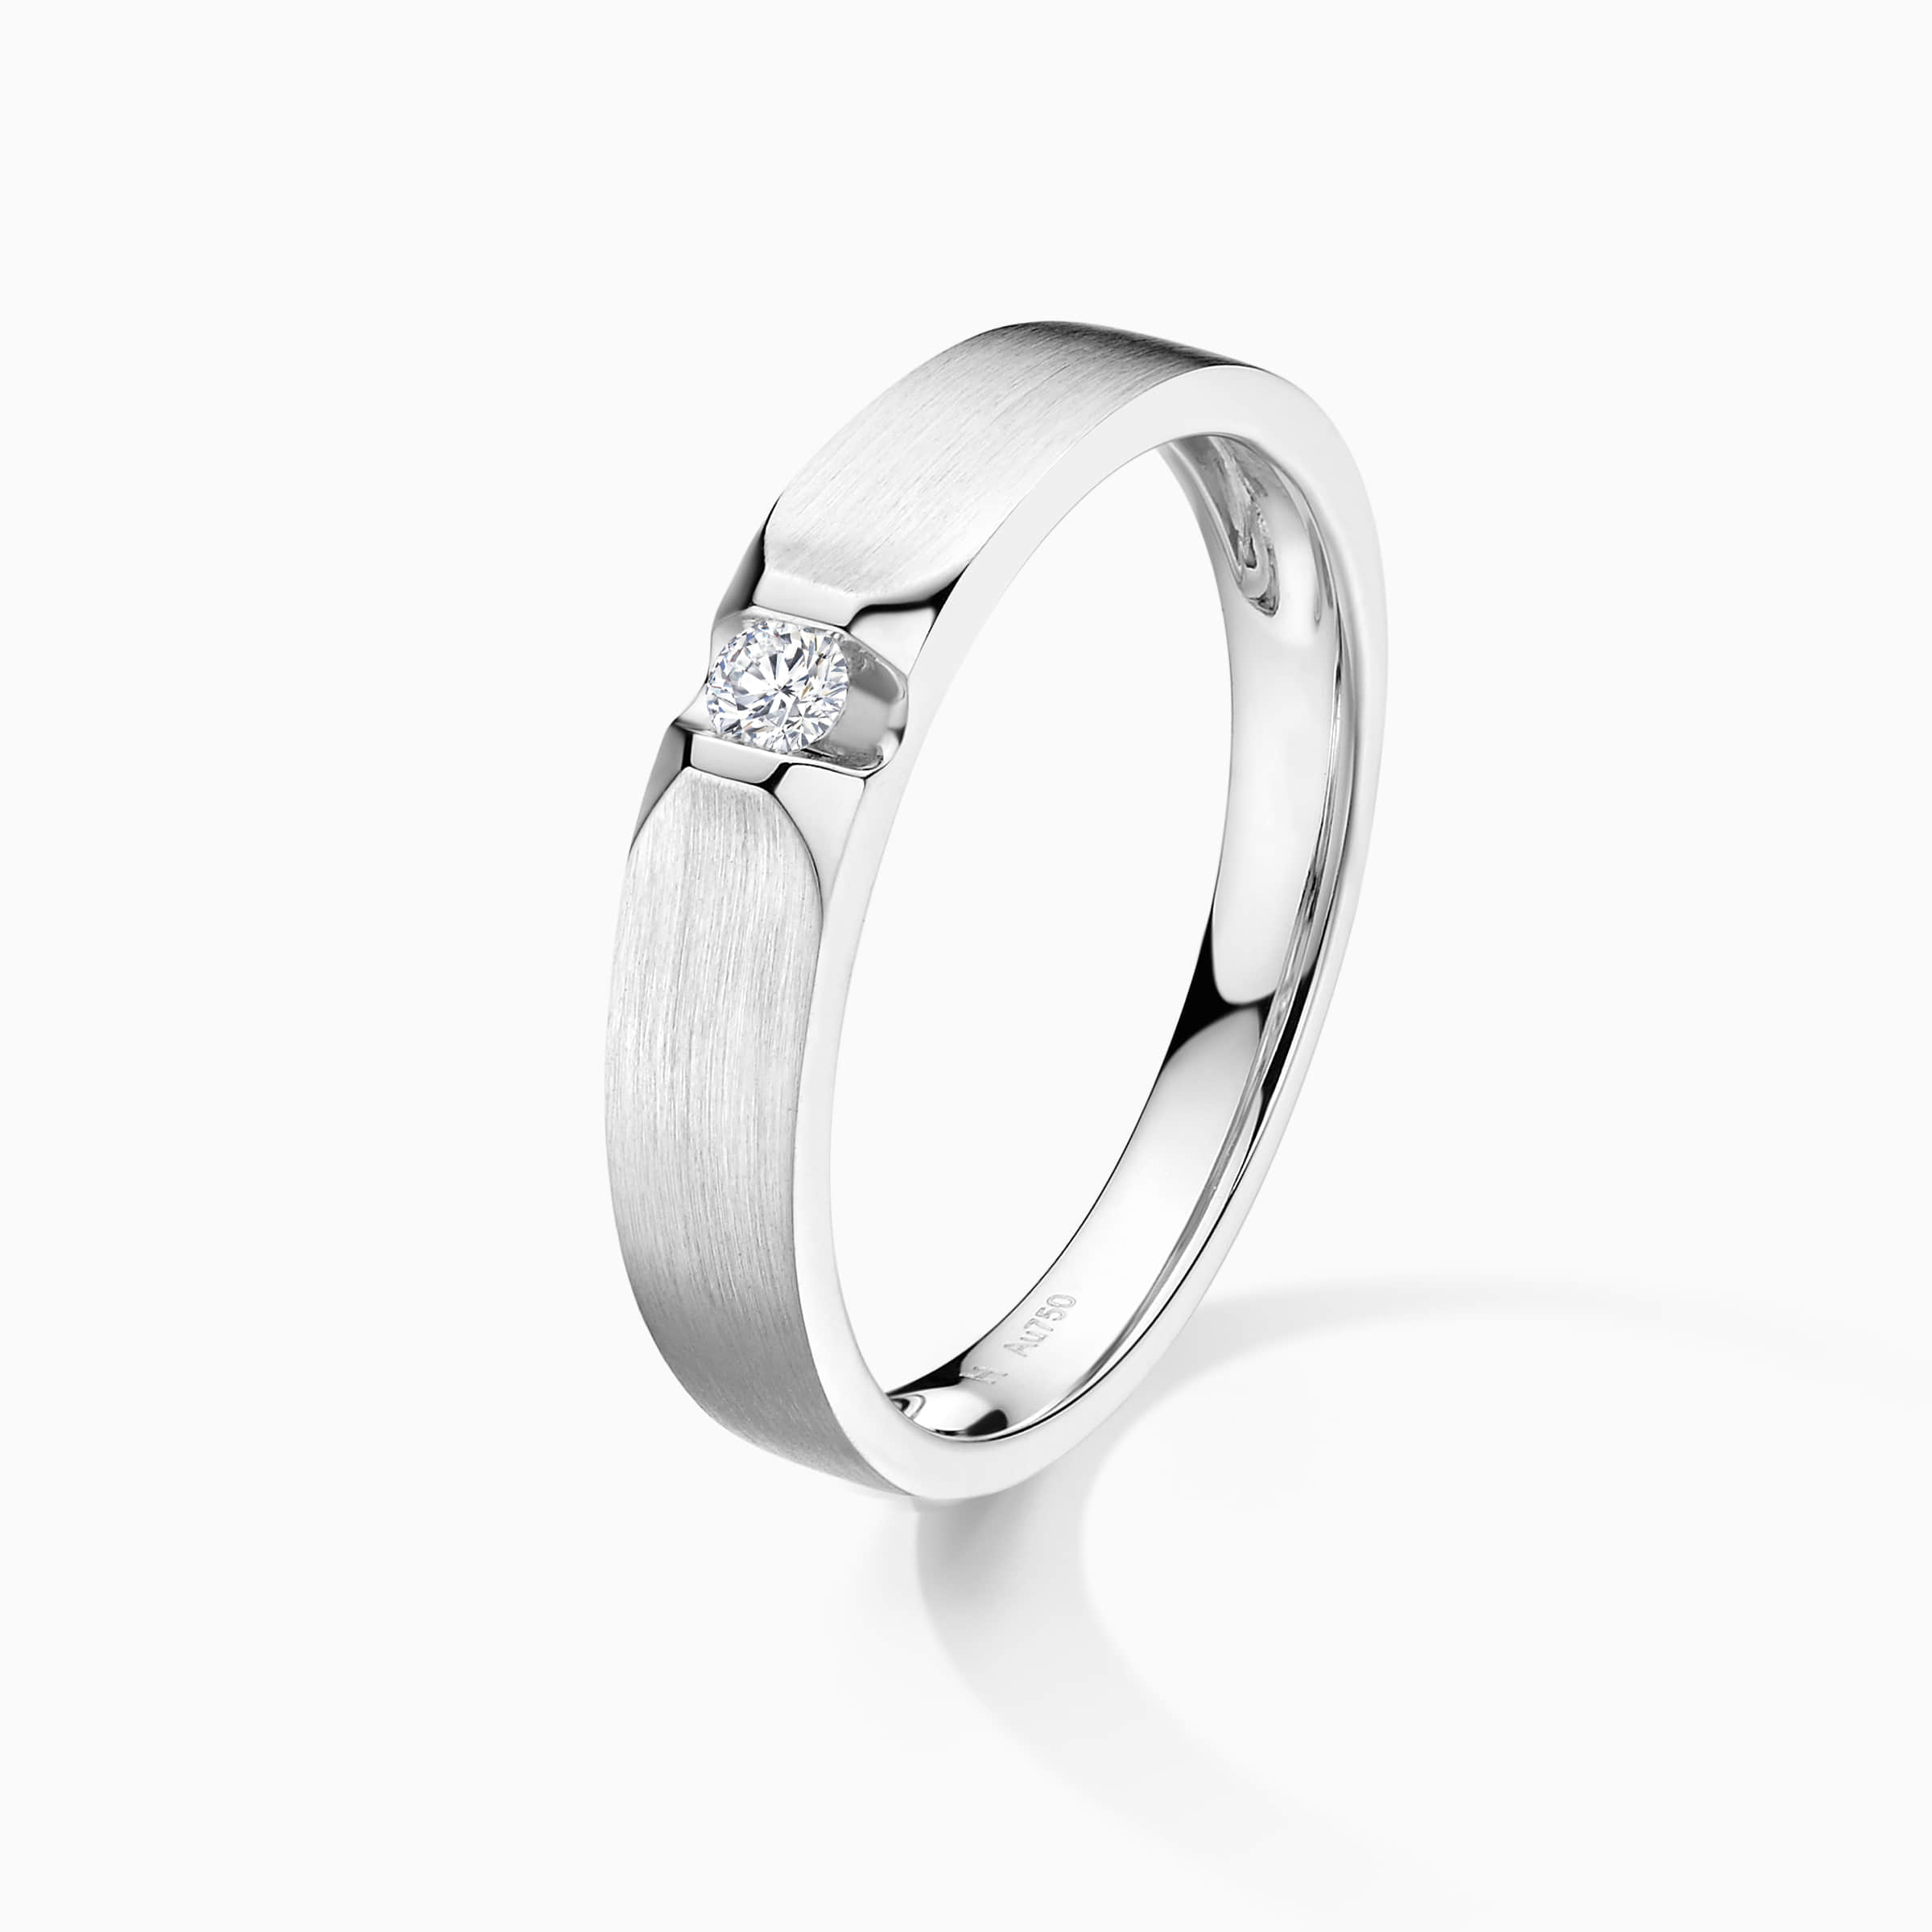 Darry Ring male wedding band with a tension-set diamond